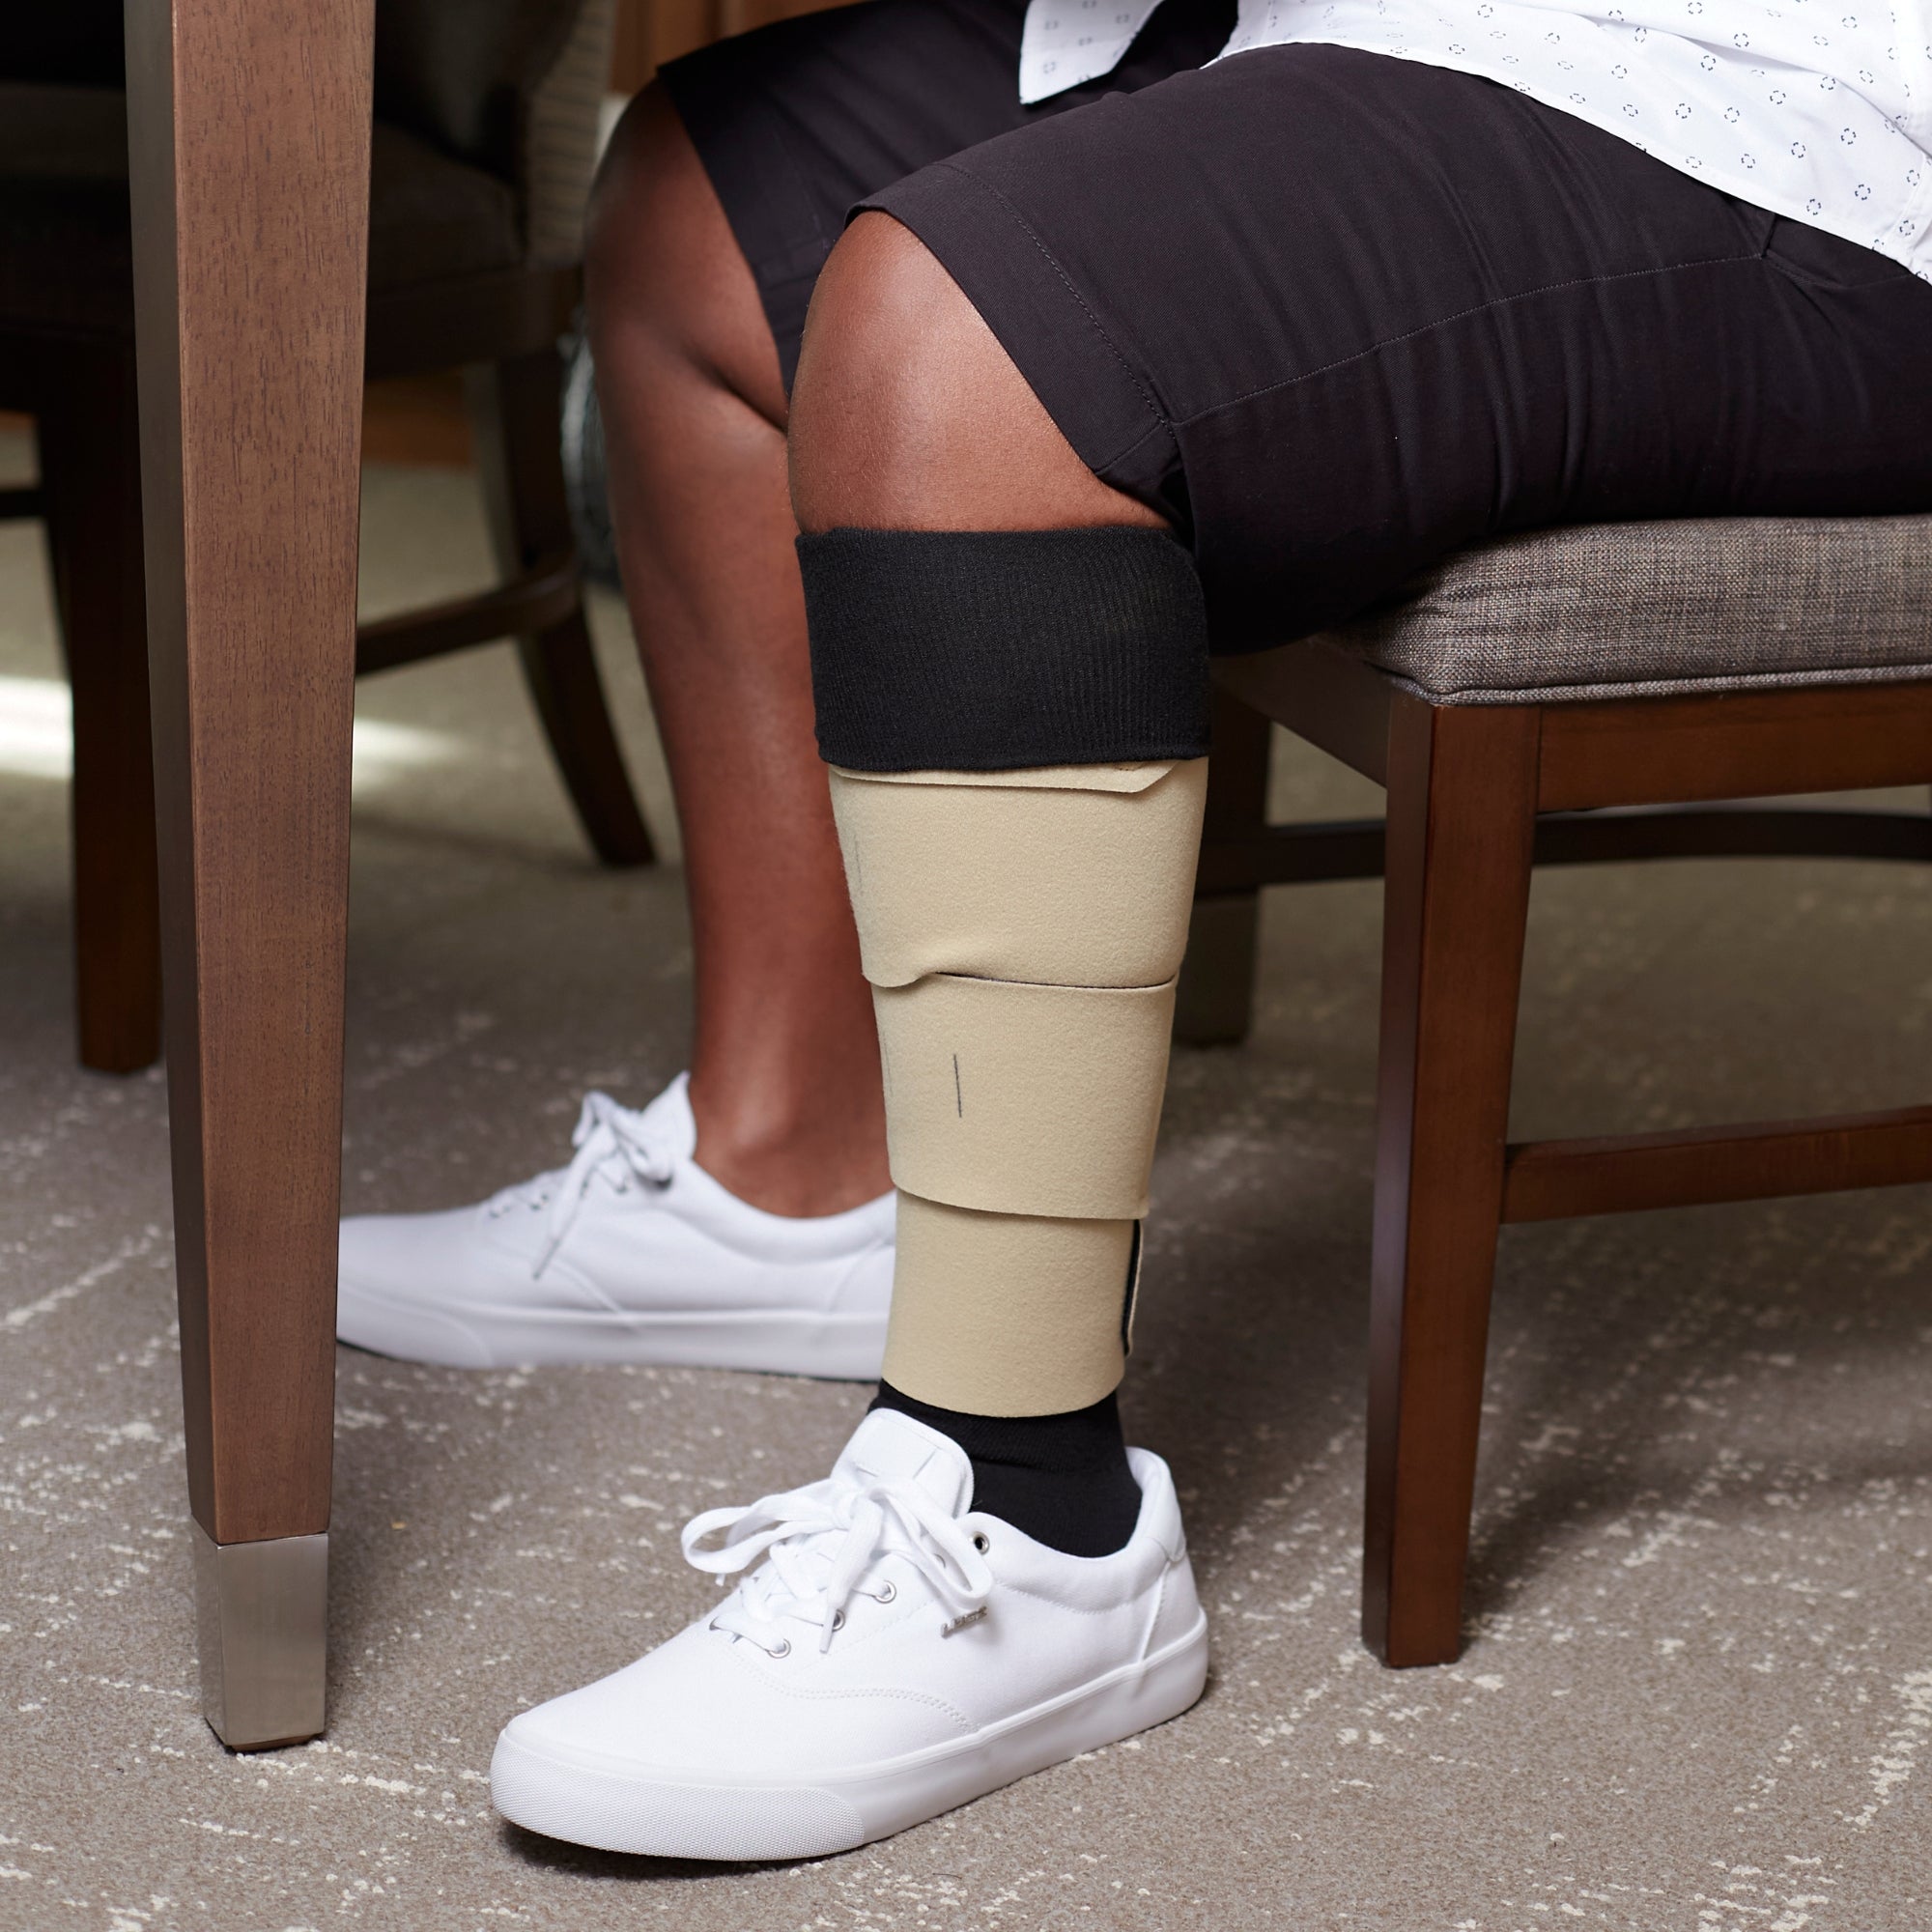  CircAid Juxtalite Lower Leg System Designed For Compression  And Easy Use